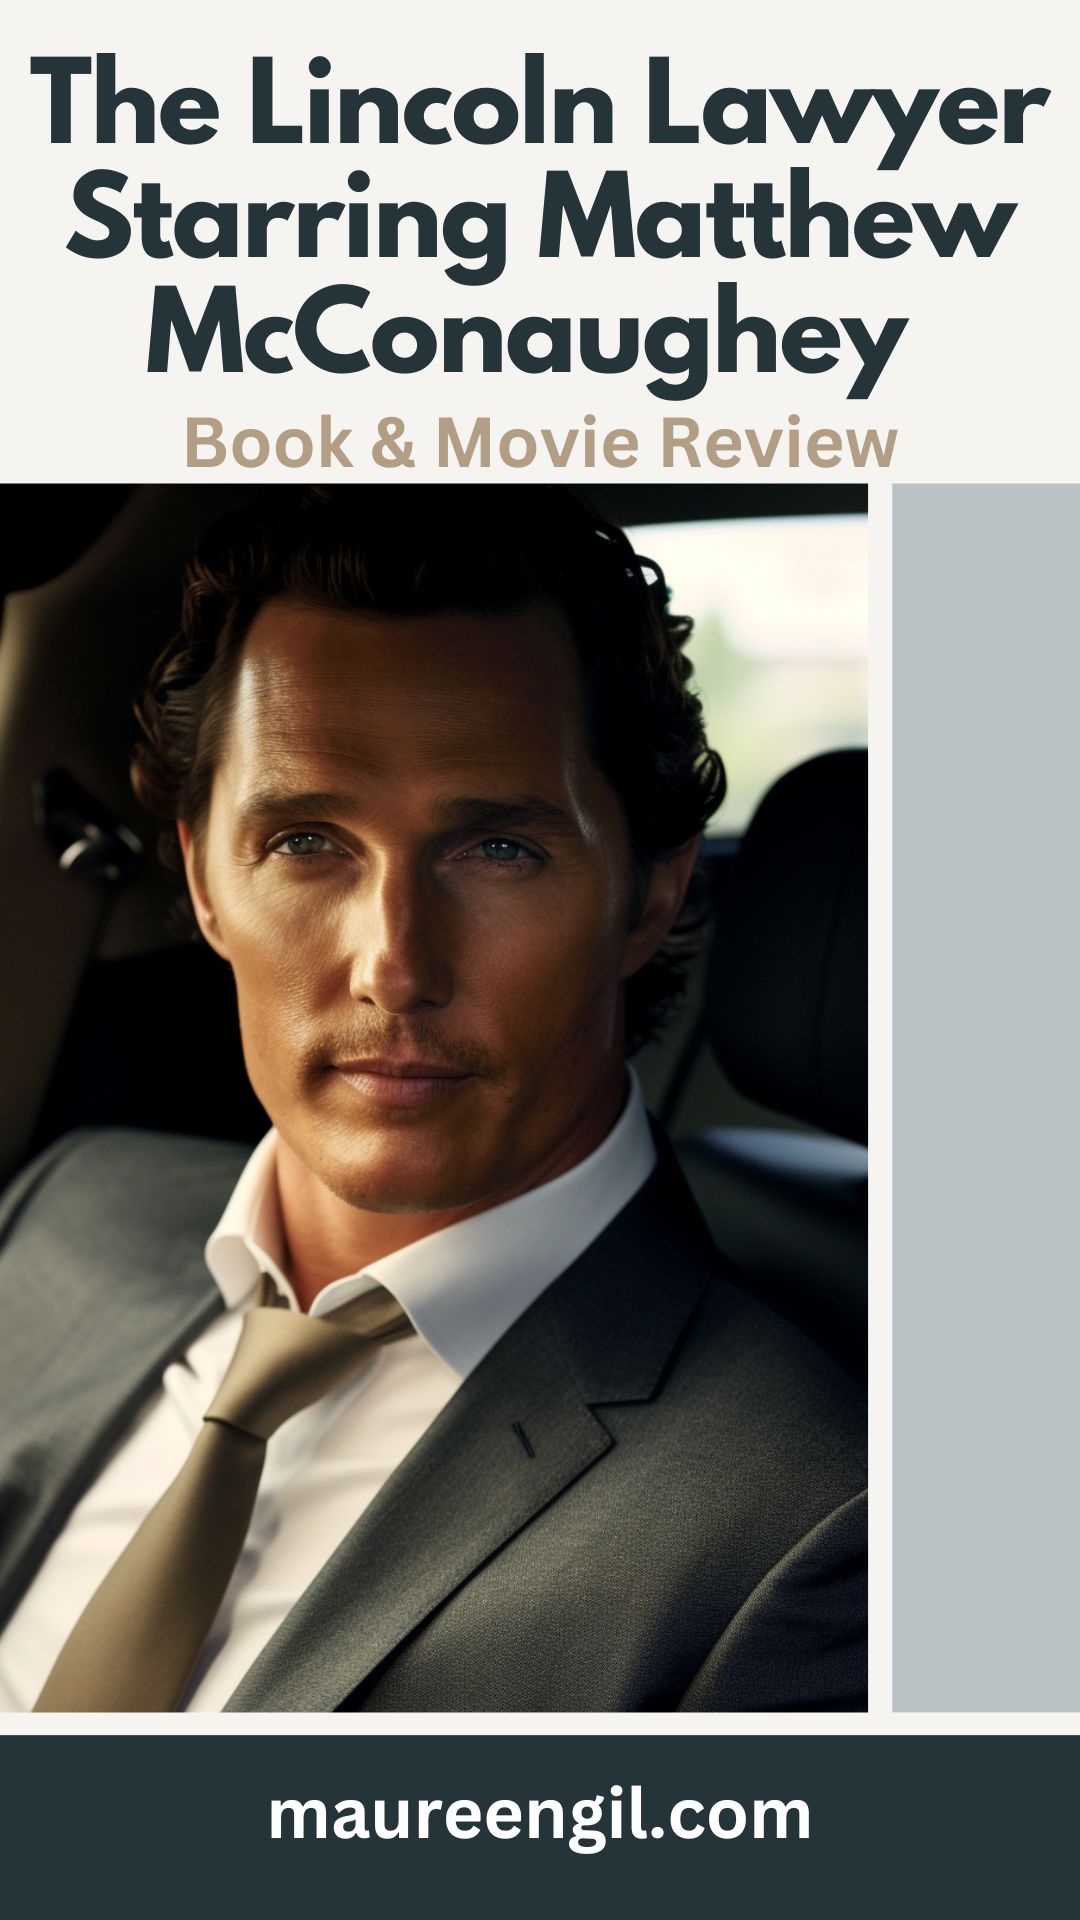 Experience a courtroom drama classic with The Lincoln Lawyer starring Matthew McConaughey, a must-watch film that combines suspense and legal drama. One of Michael Connelly's best sellers. Don't miss this gripping book-to-movie adaptation of Michael Connelly's best-selling novel that keeps you guessing till the end! 🌟🔎 #TheLincolnLawyer #MatthewMcConaughey #LegalThriller #BookReview #MovieAdaptation #CrimeDrama #Suspense #MustWatch #Thriller #Movies #Books #Reading #Entertainment